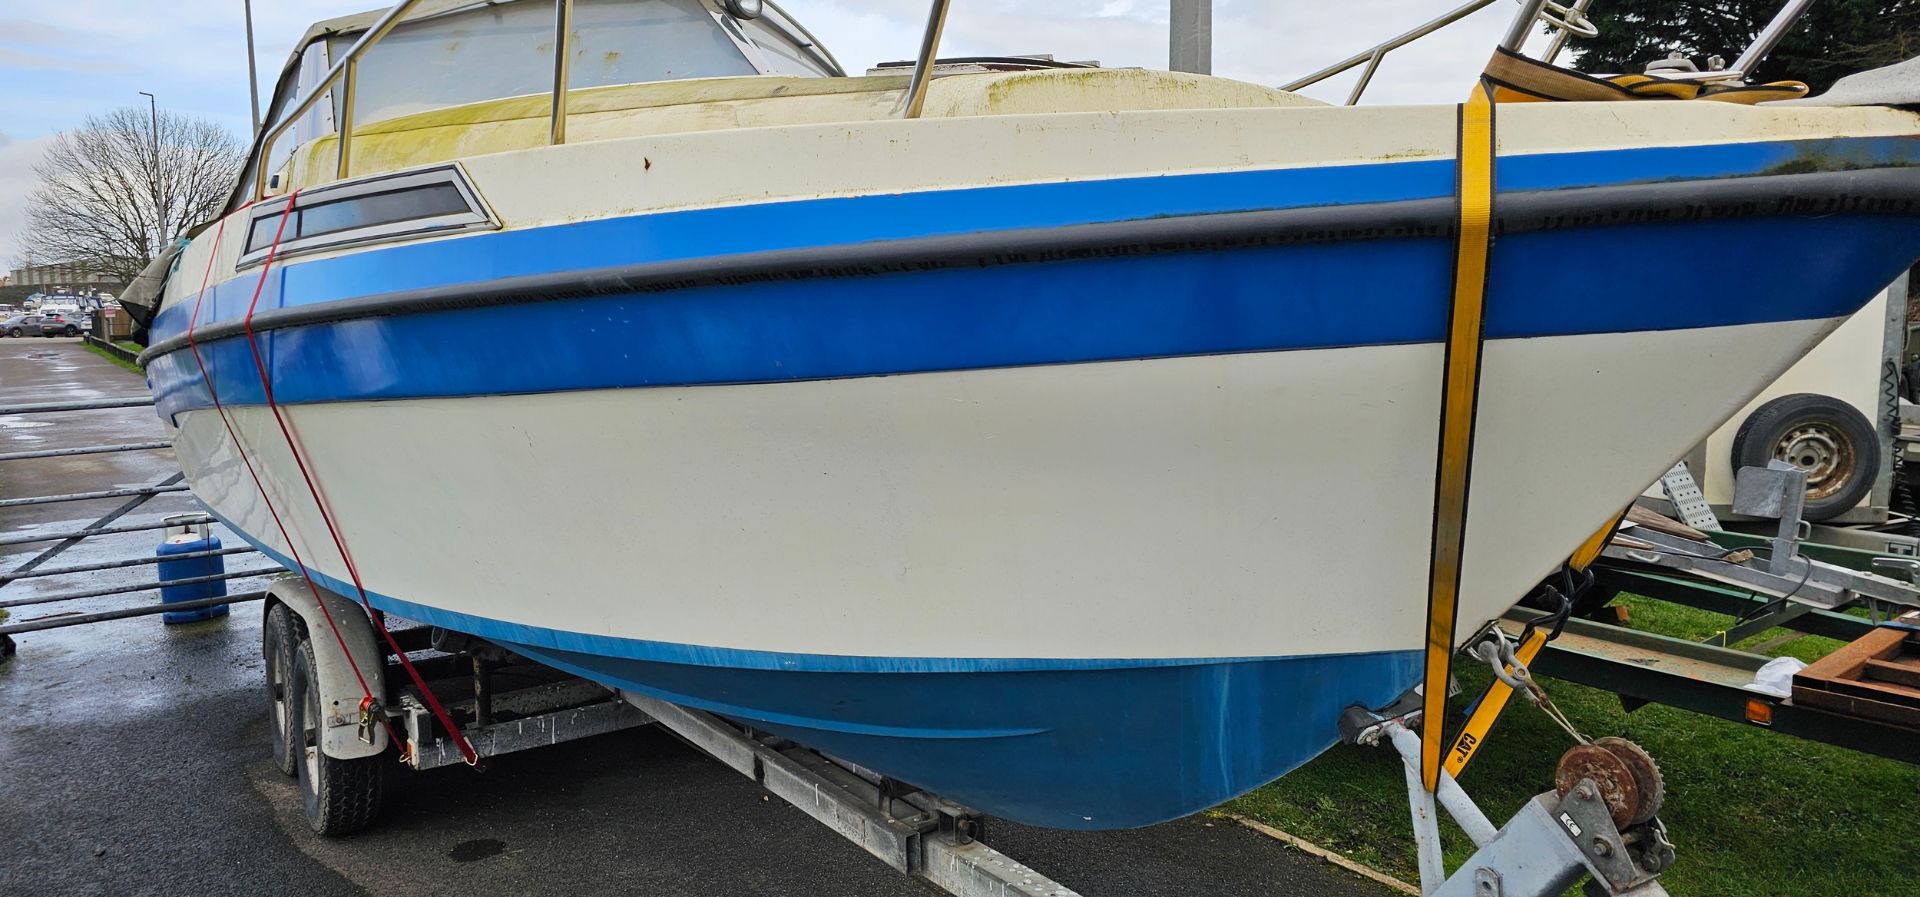 21 foot power boat, project, with jet drive engine, V berth cabin with sink and separate heads, - Image 3 of 19